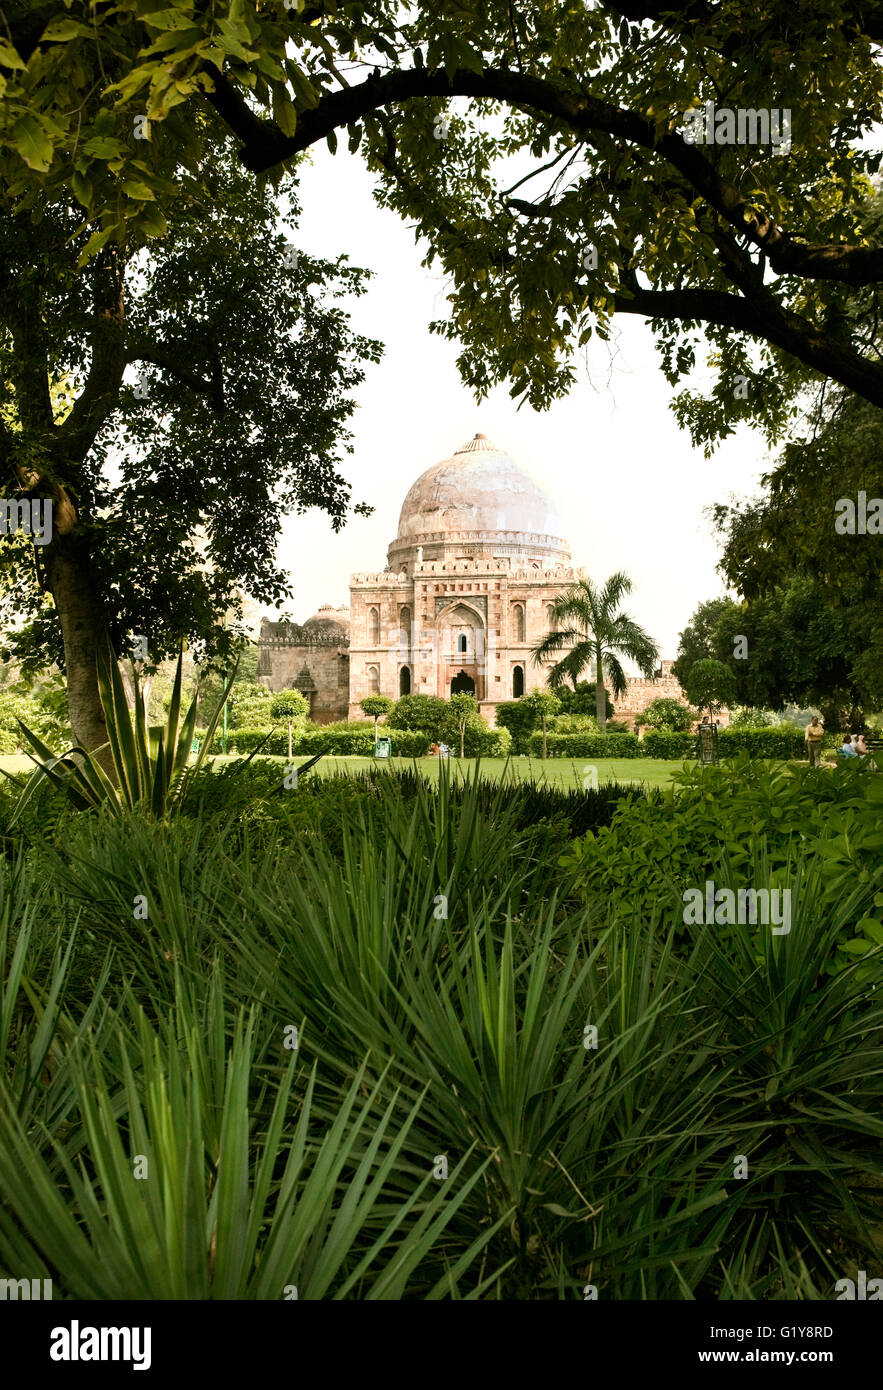 The Bara-Gumbad Tomb is one of two square-plan tombs in Lodi Gardens, New Delhi, India. Stock Photo